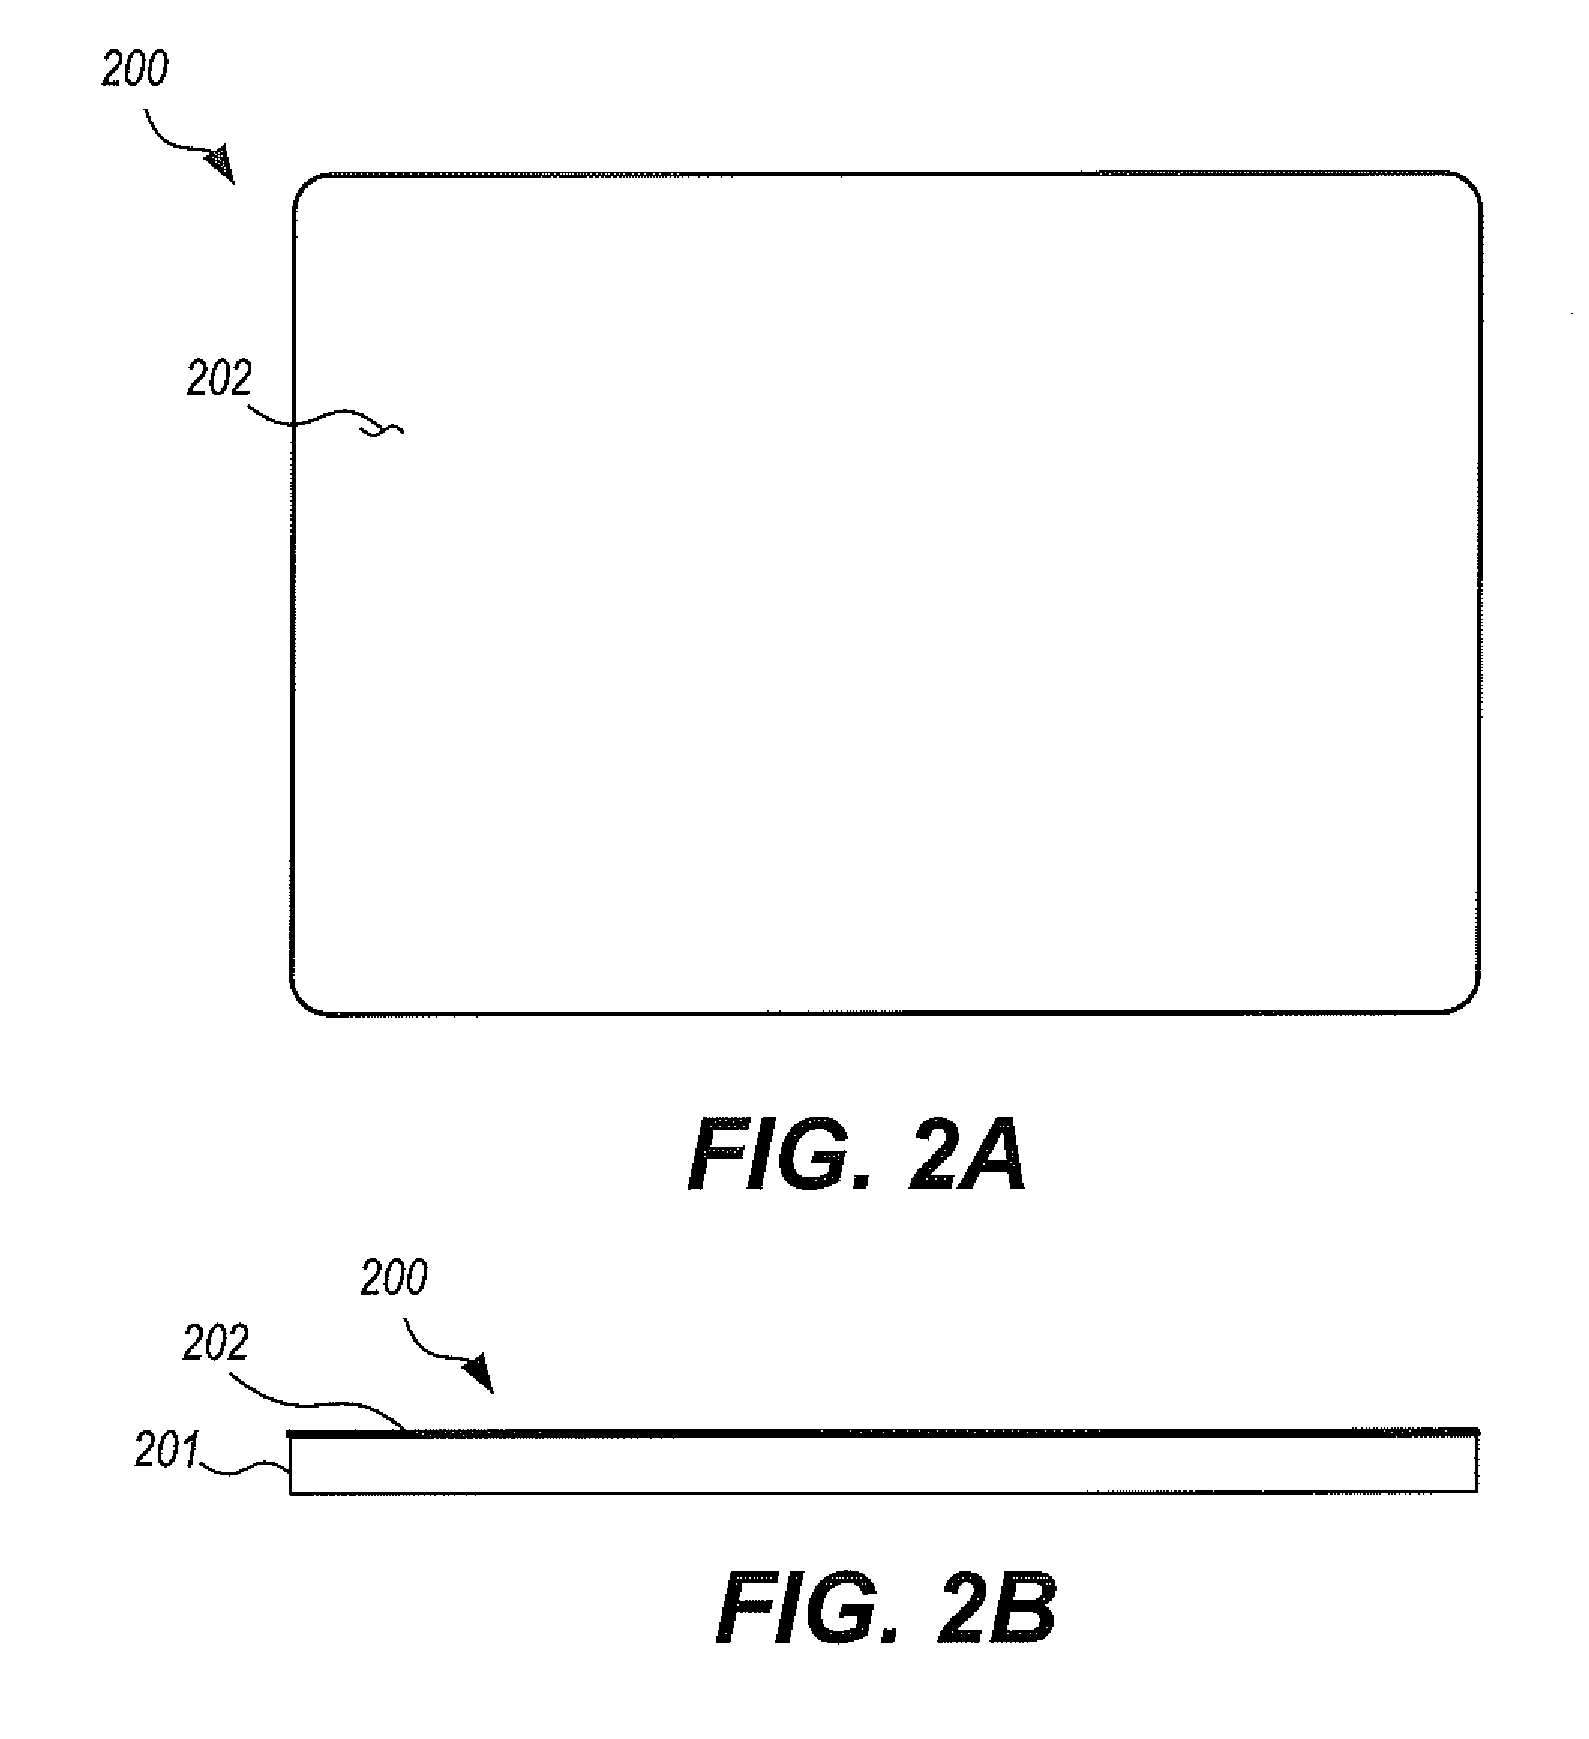 Bleed area adjustment technique for use in printing multiple articles of manufacture